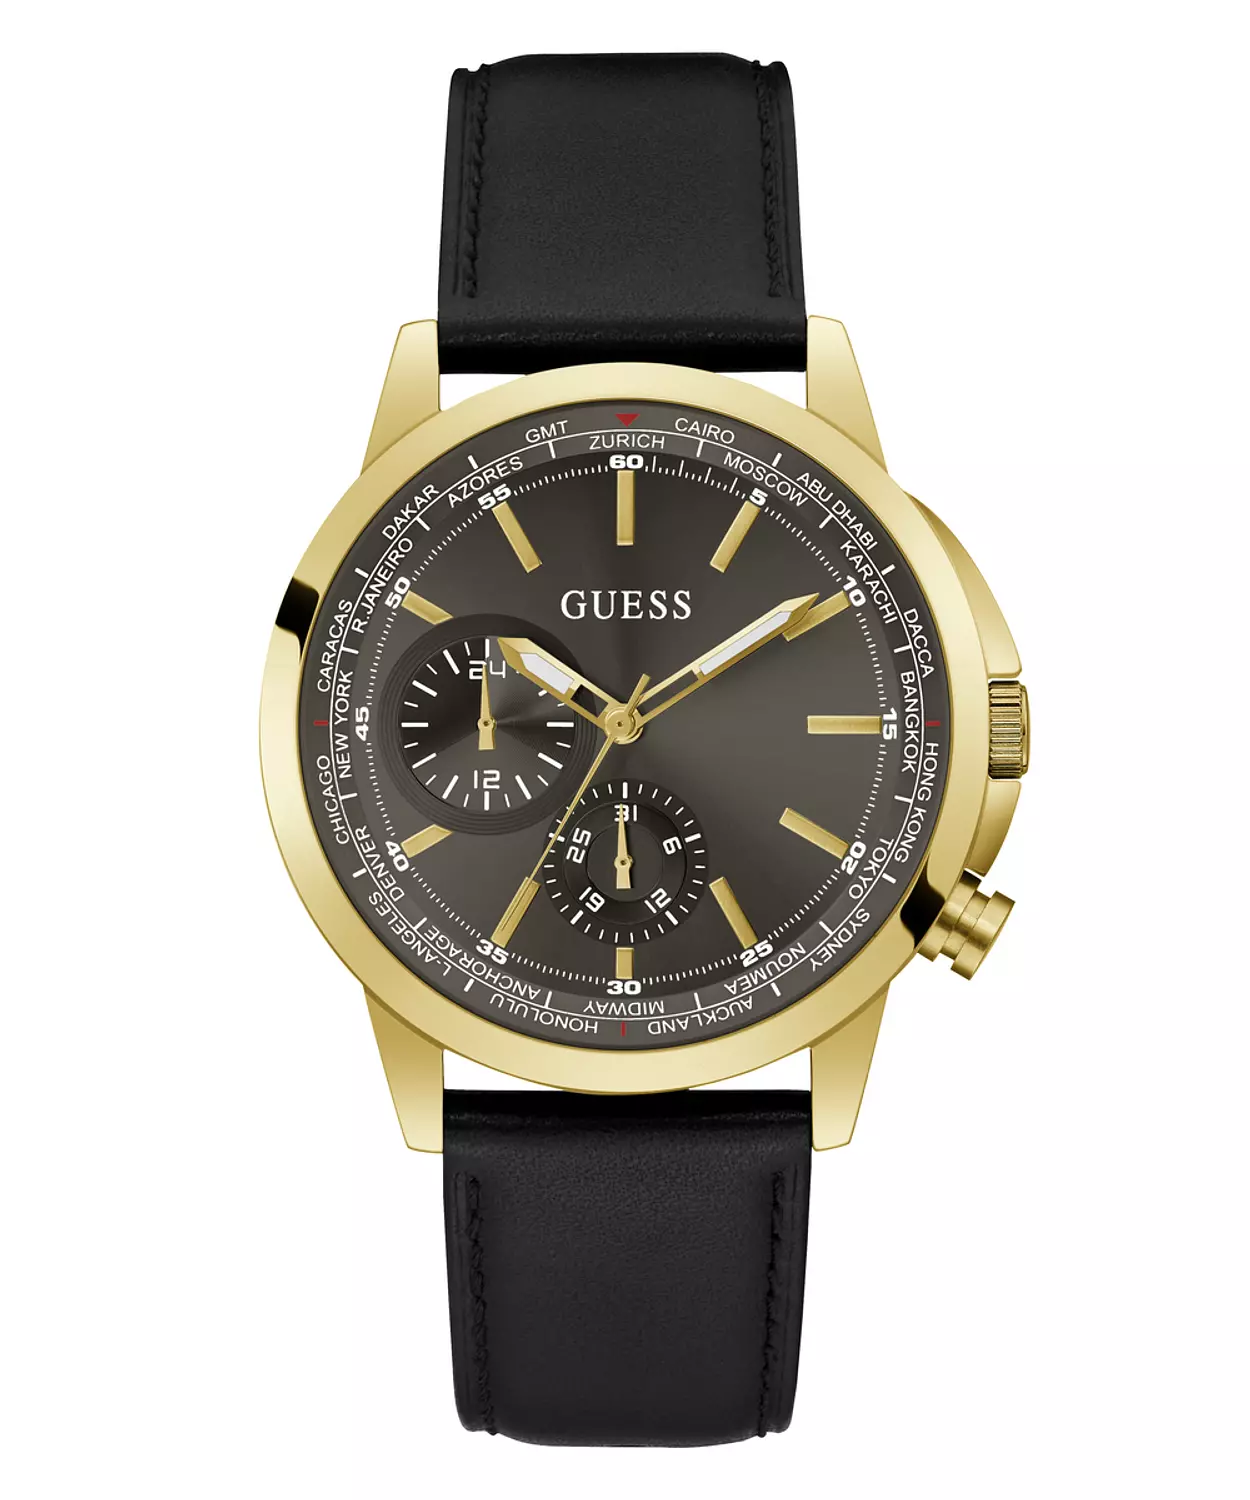 GUESS GW0540G1 ANALOG WATCH For Men Round Shape BlackGenuine Leather Smooth Strap 0